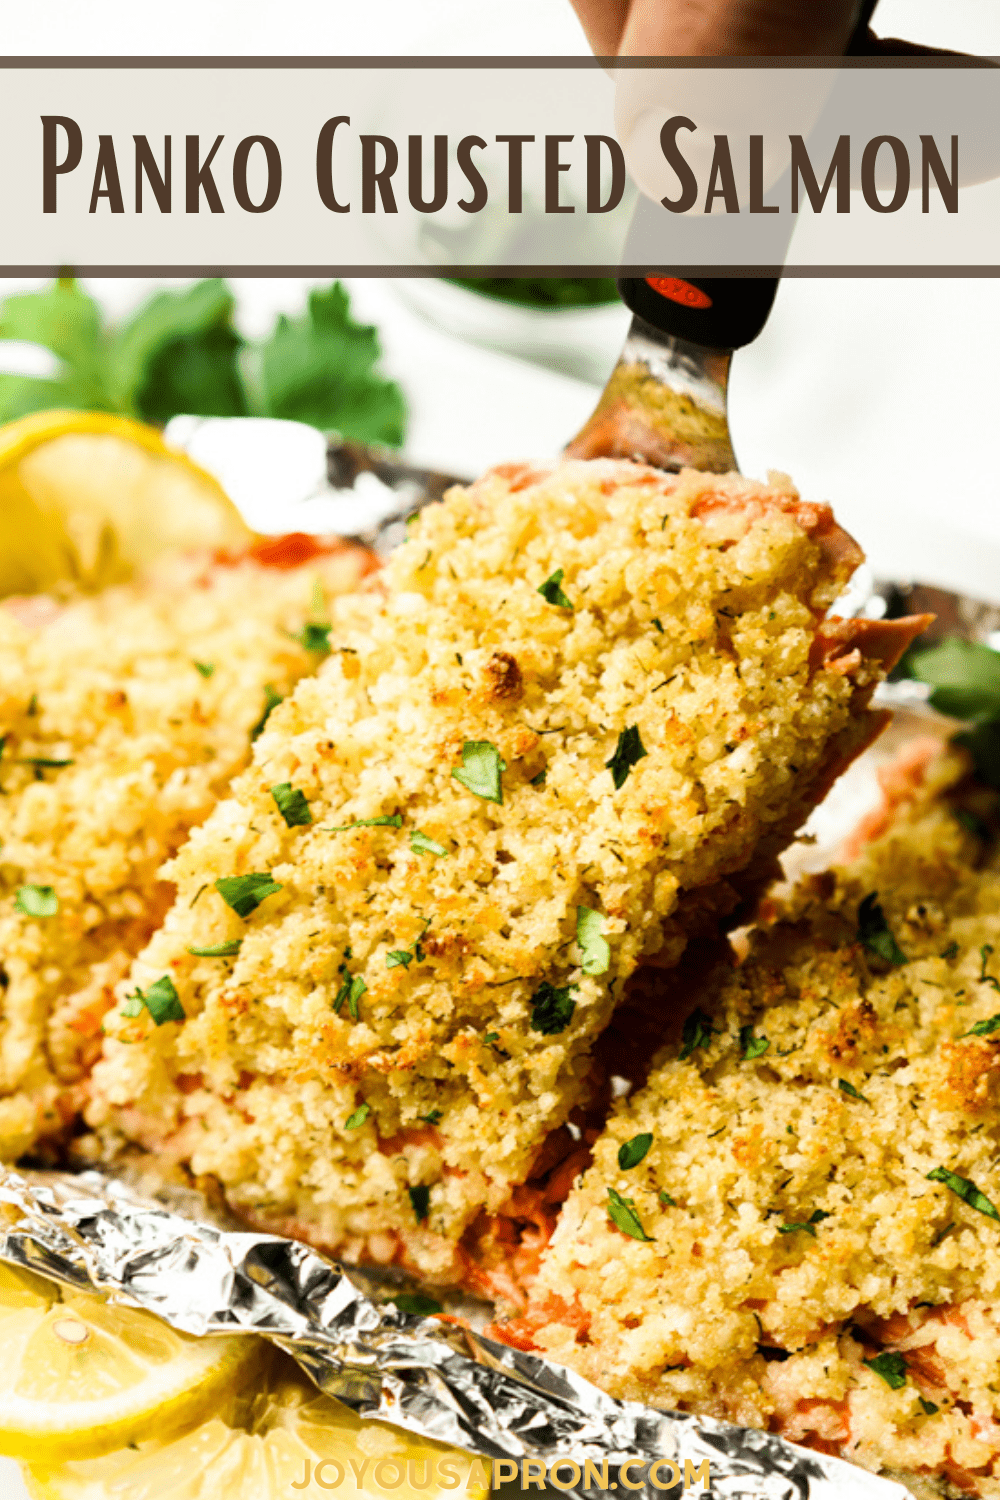 Panko Crusted Salmon - Easy and healthy fish and seafood dinner ready under 20 minutes! Juicy baked salmon topped with crispy Panko and parmesan crust. via @joyousapron